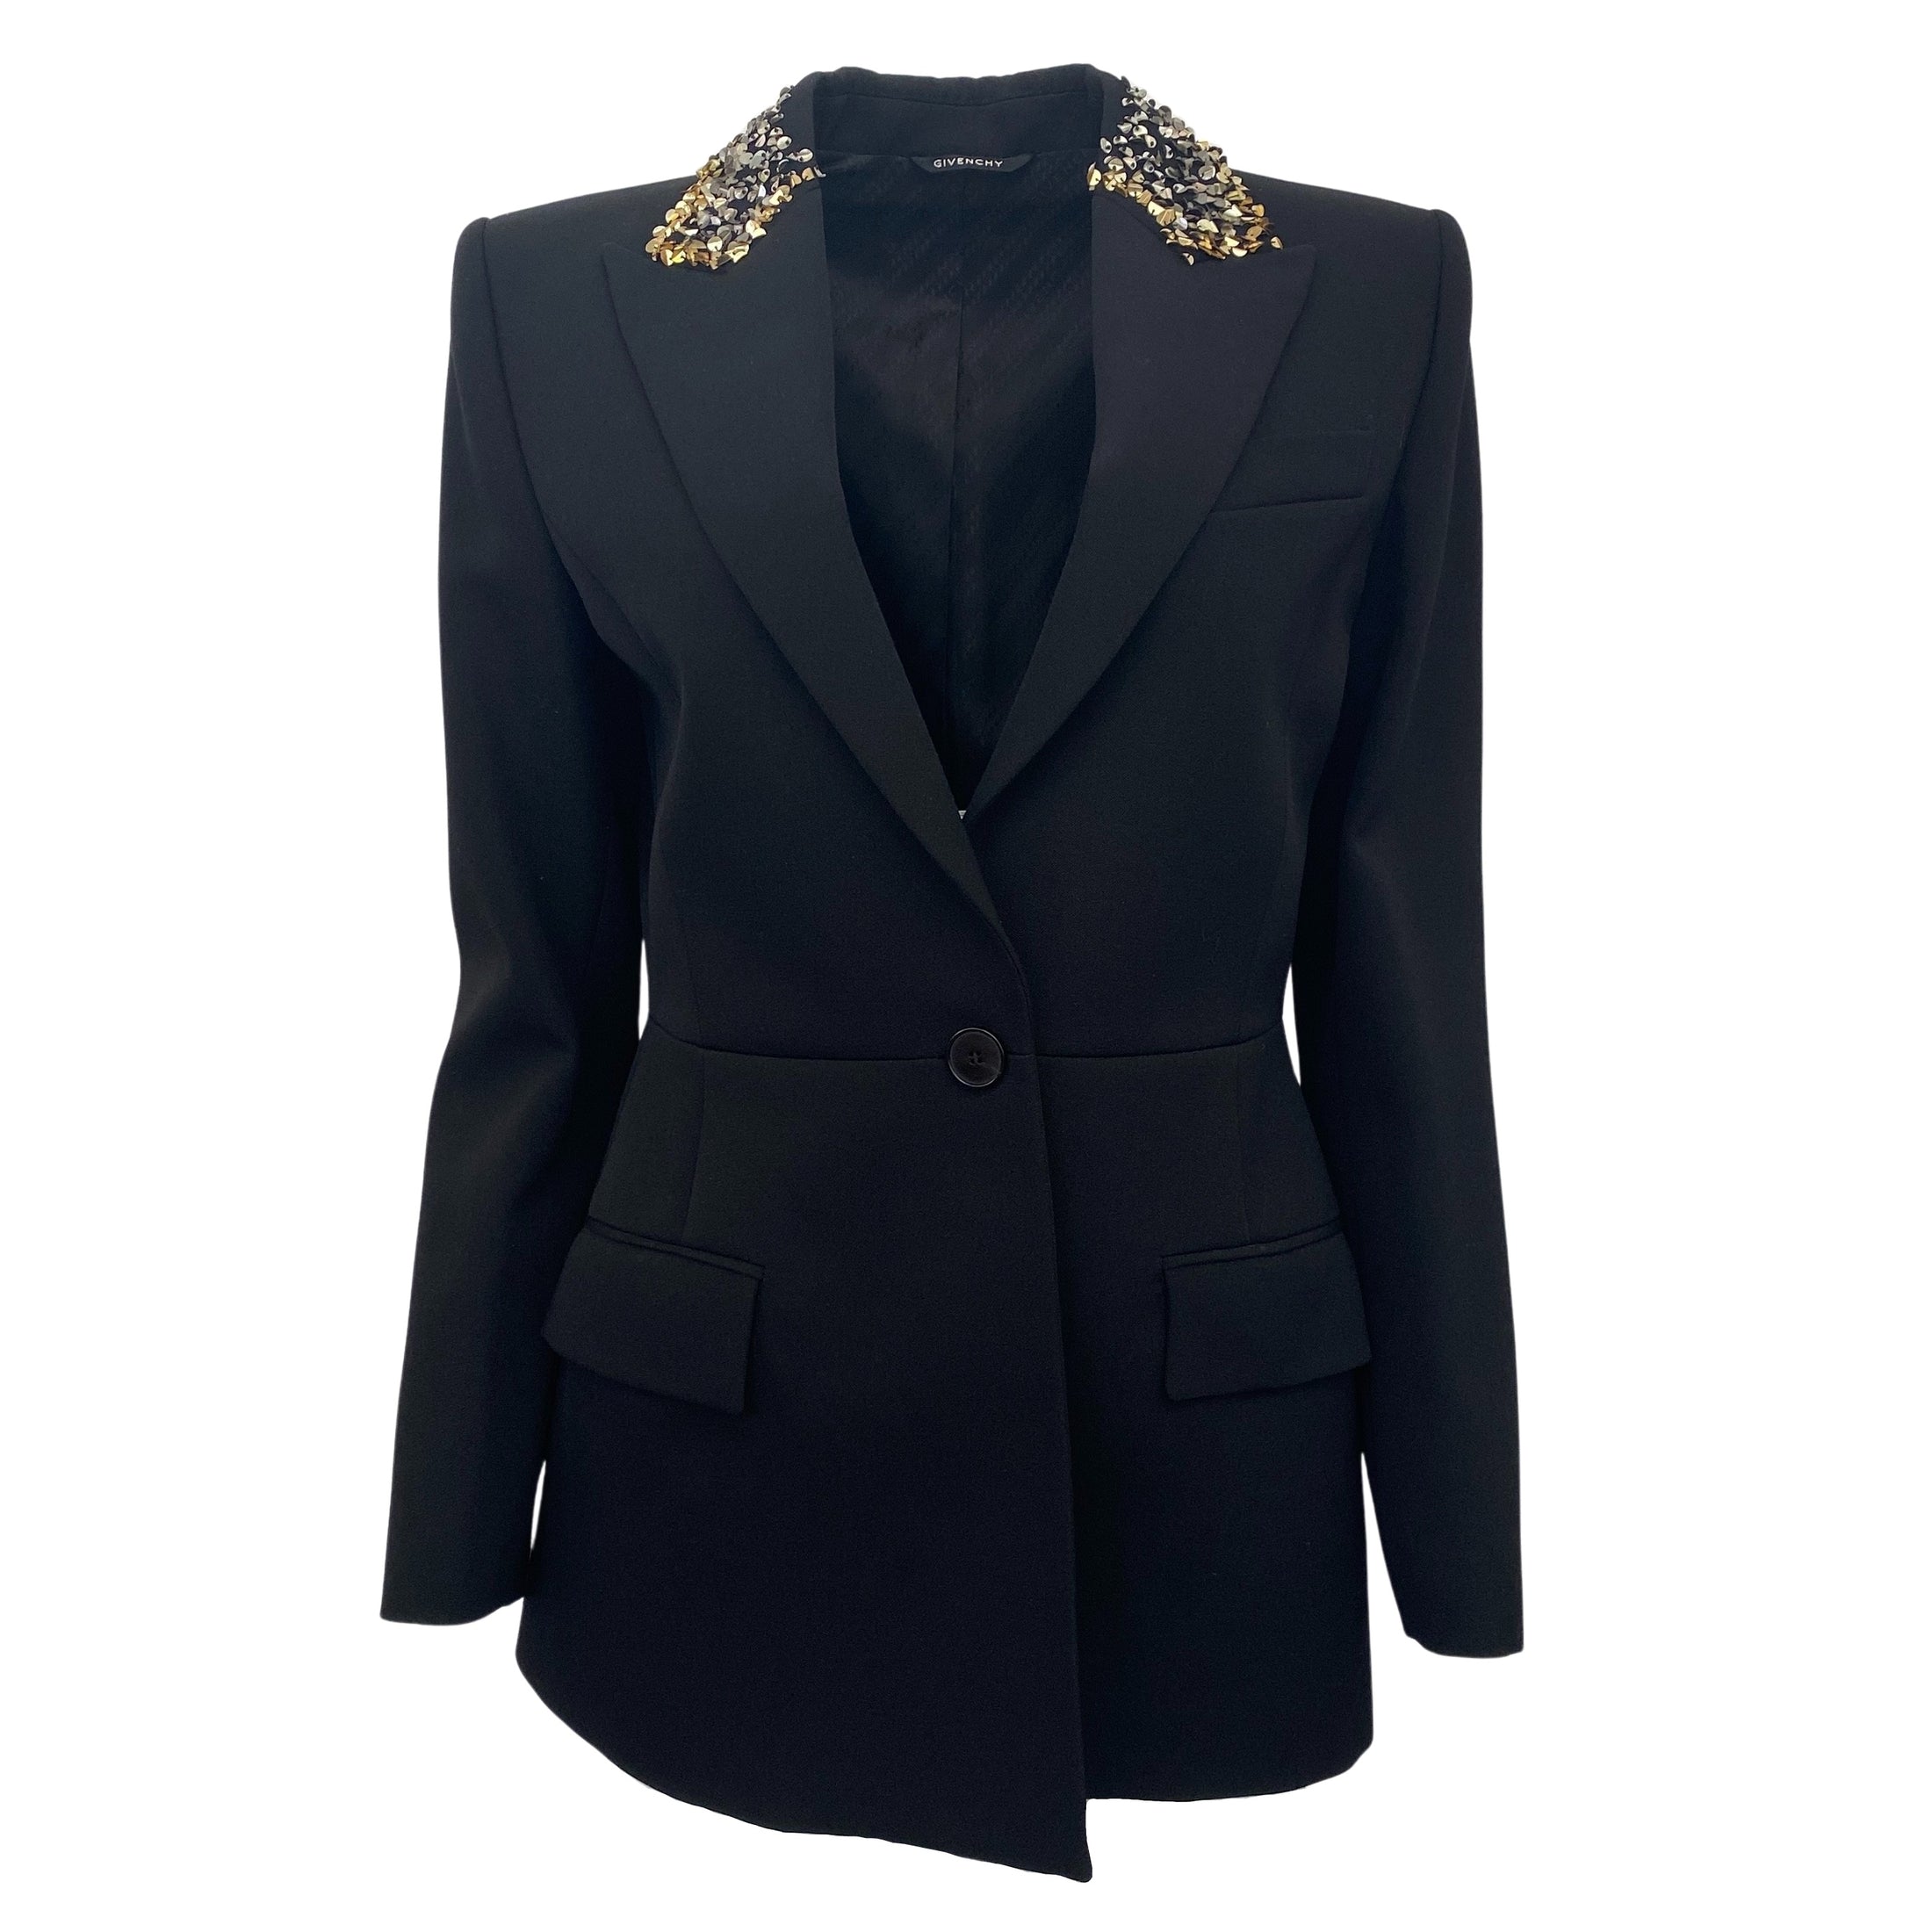 Givenchy Black Wool Blazer with Gold / Silver Sequined Collar